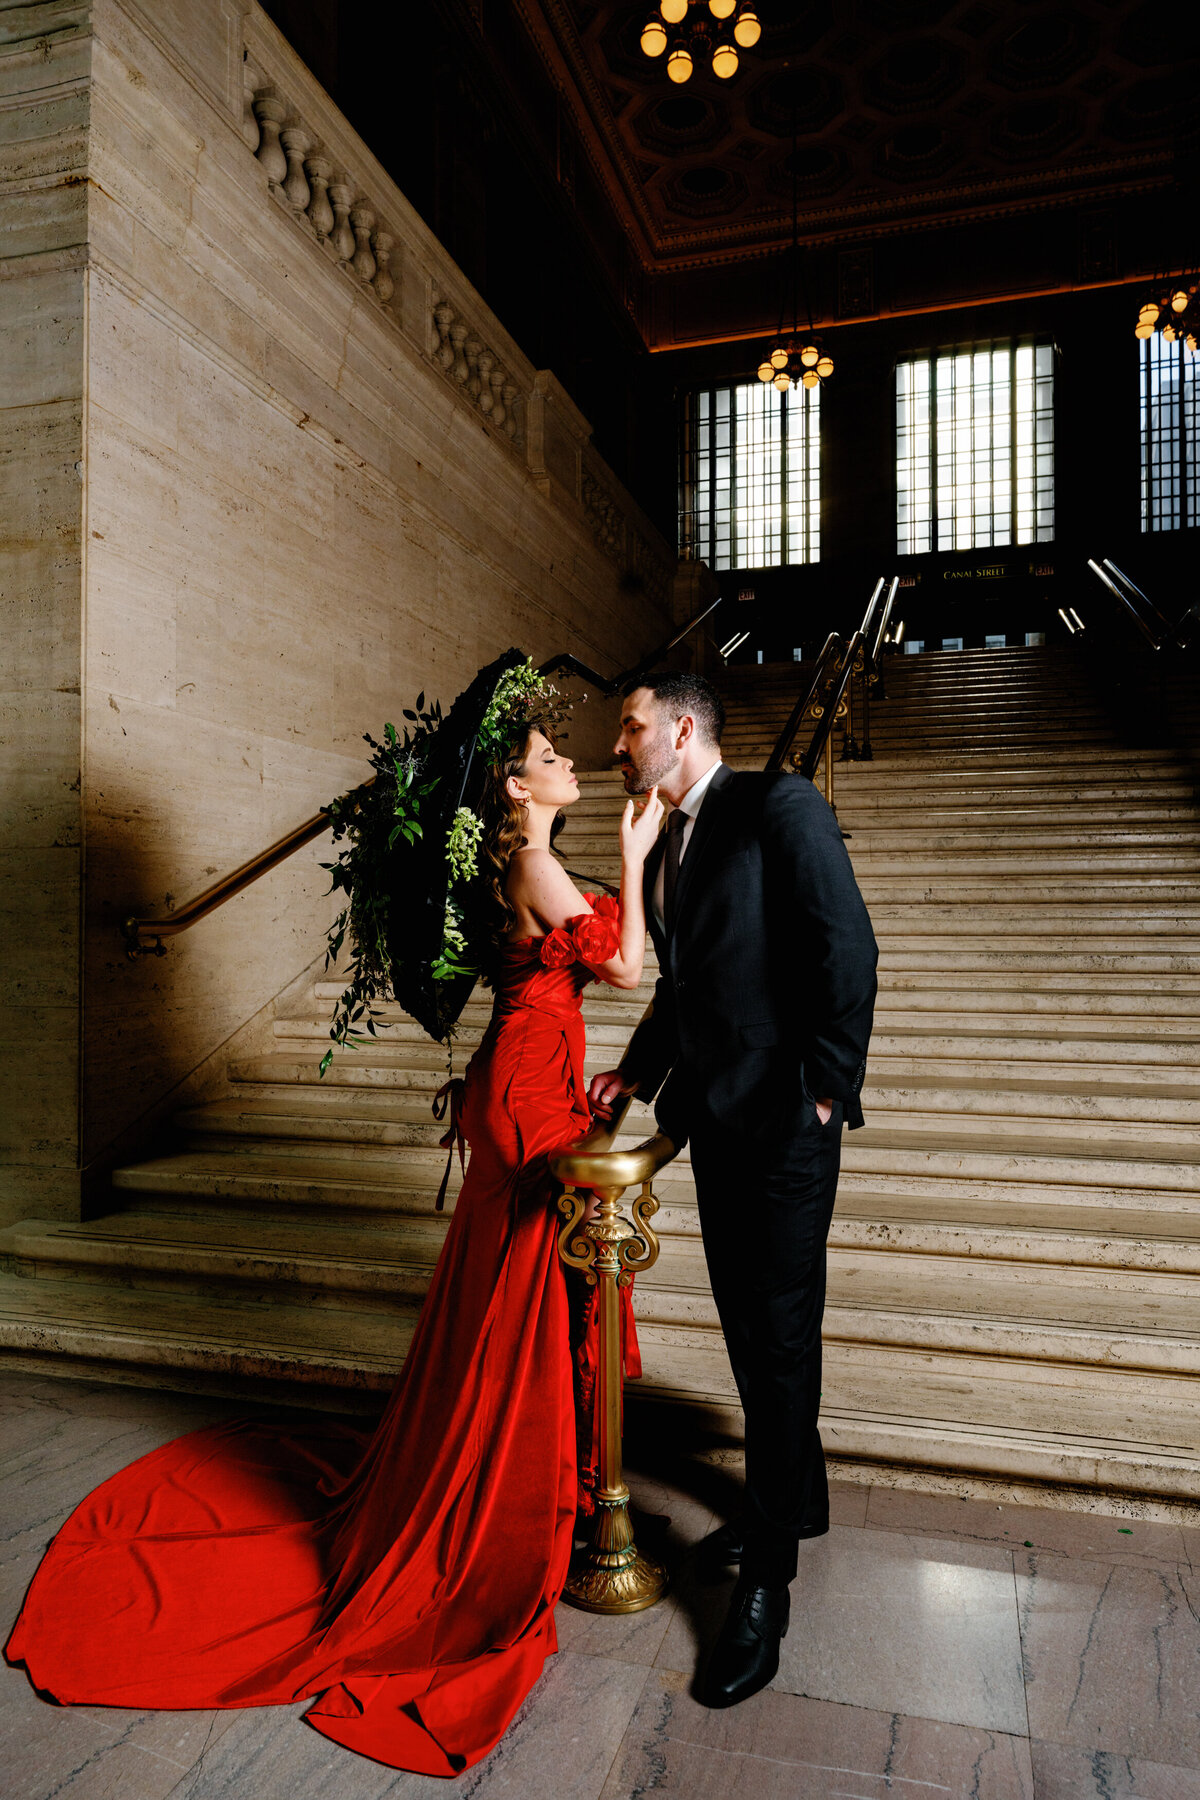 Aspen-Avenue-Chicago-Wedding-Photographer-Union-Station-Chicago-Theater-Engagement-Session-Timeless-Romantic-Red-Dress-Editorial-Stemming-From-Love-Bry-Jean-Artistry-The-Bridal-Collective-True-to-color-Luxury-FAV-33